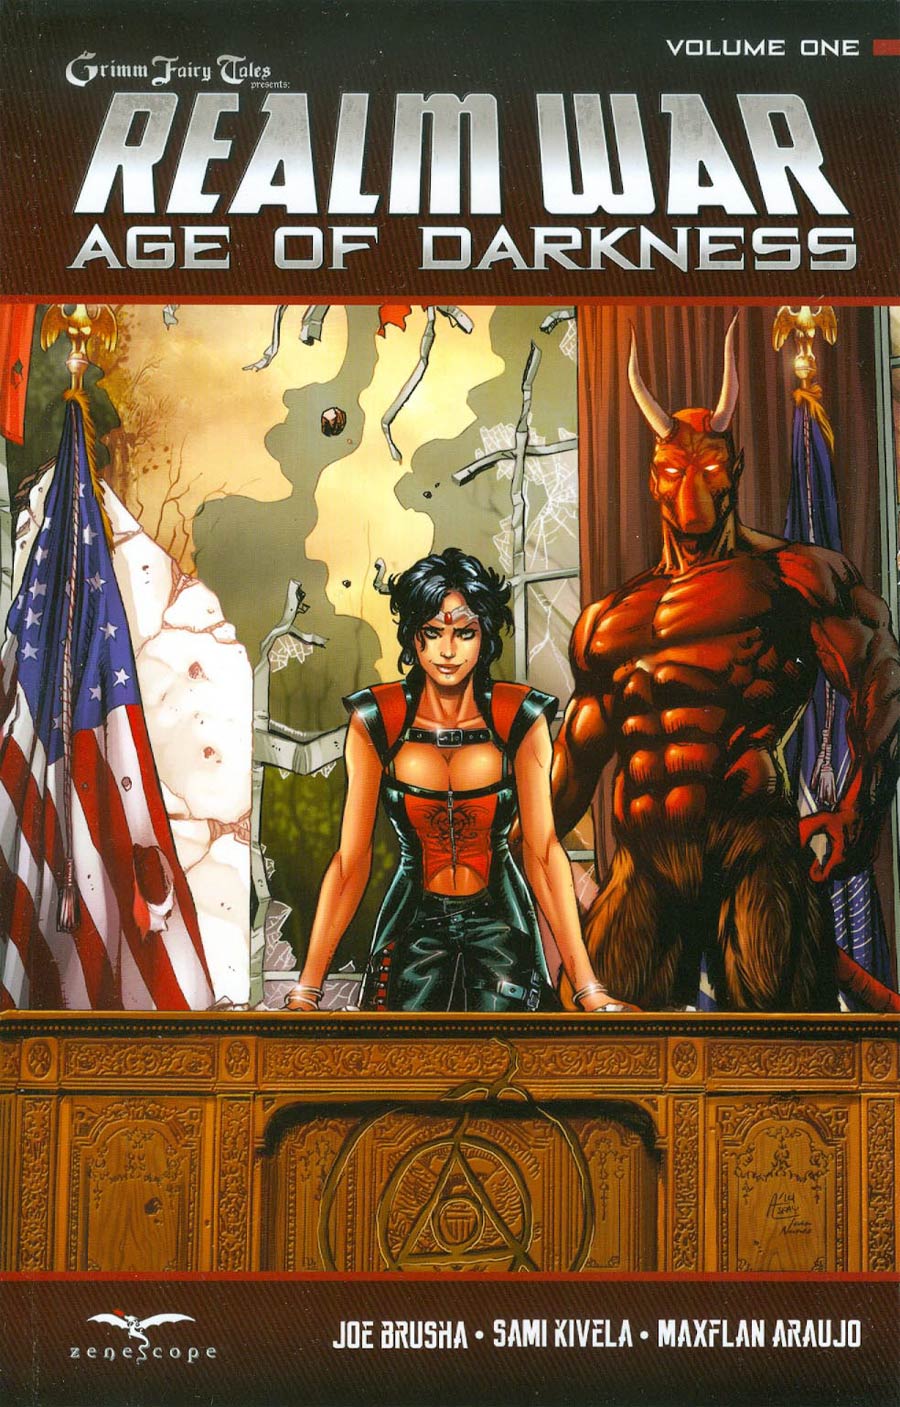 Grimm Fairy Tales Presents Realm War Age Of Darkness Vol 1 TP